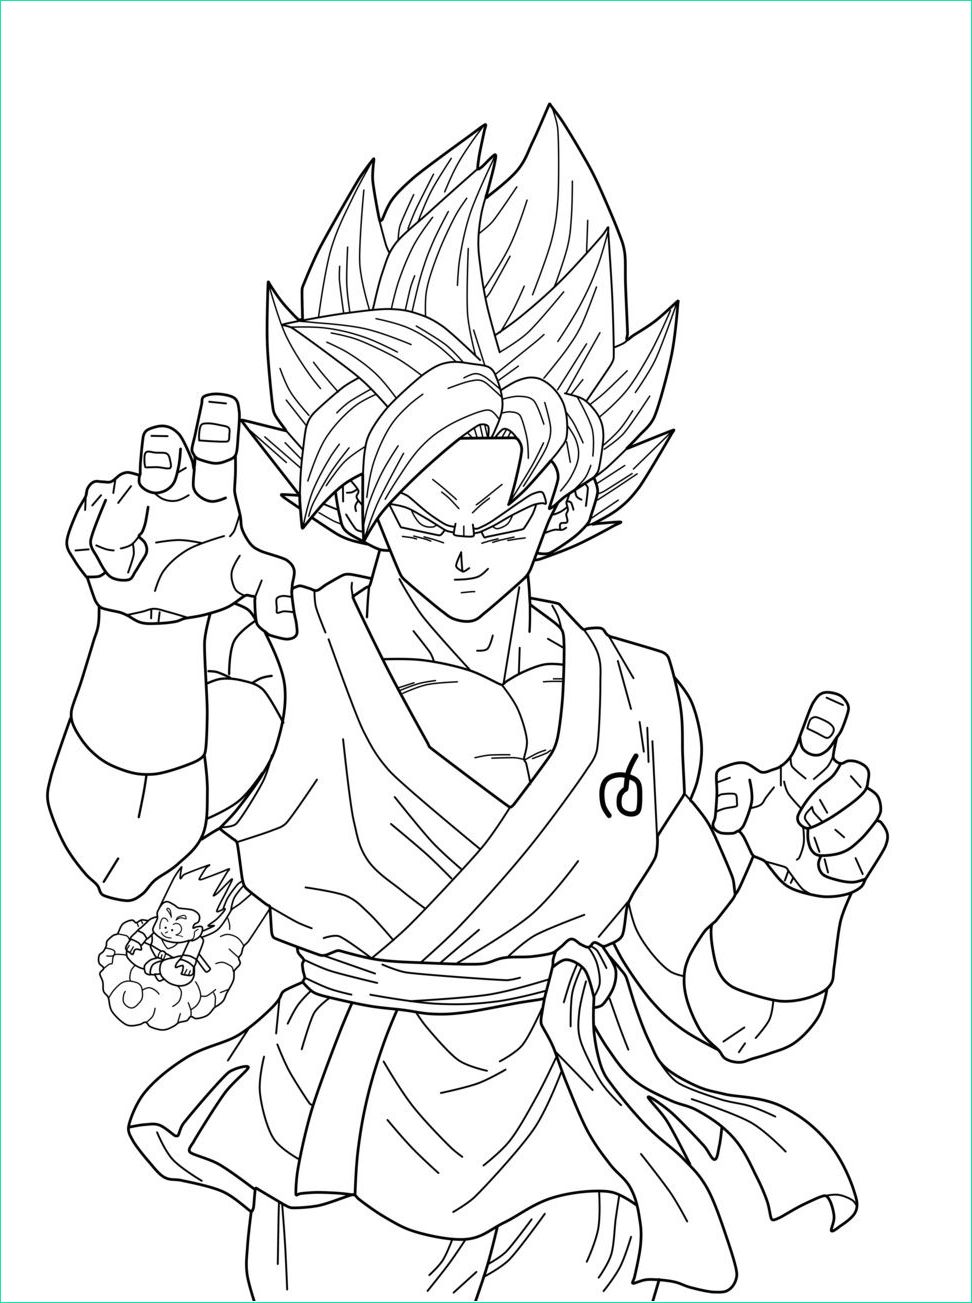 Dessin Dbz Super Luxe Images Dragon Ball Z Super Coloring Pages Coloring Pages Ideas